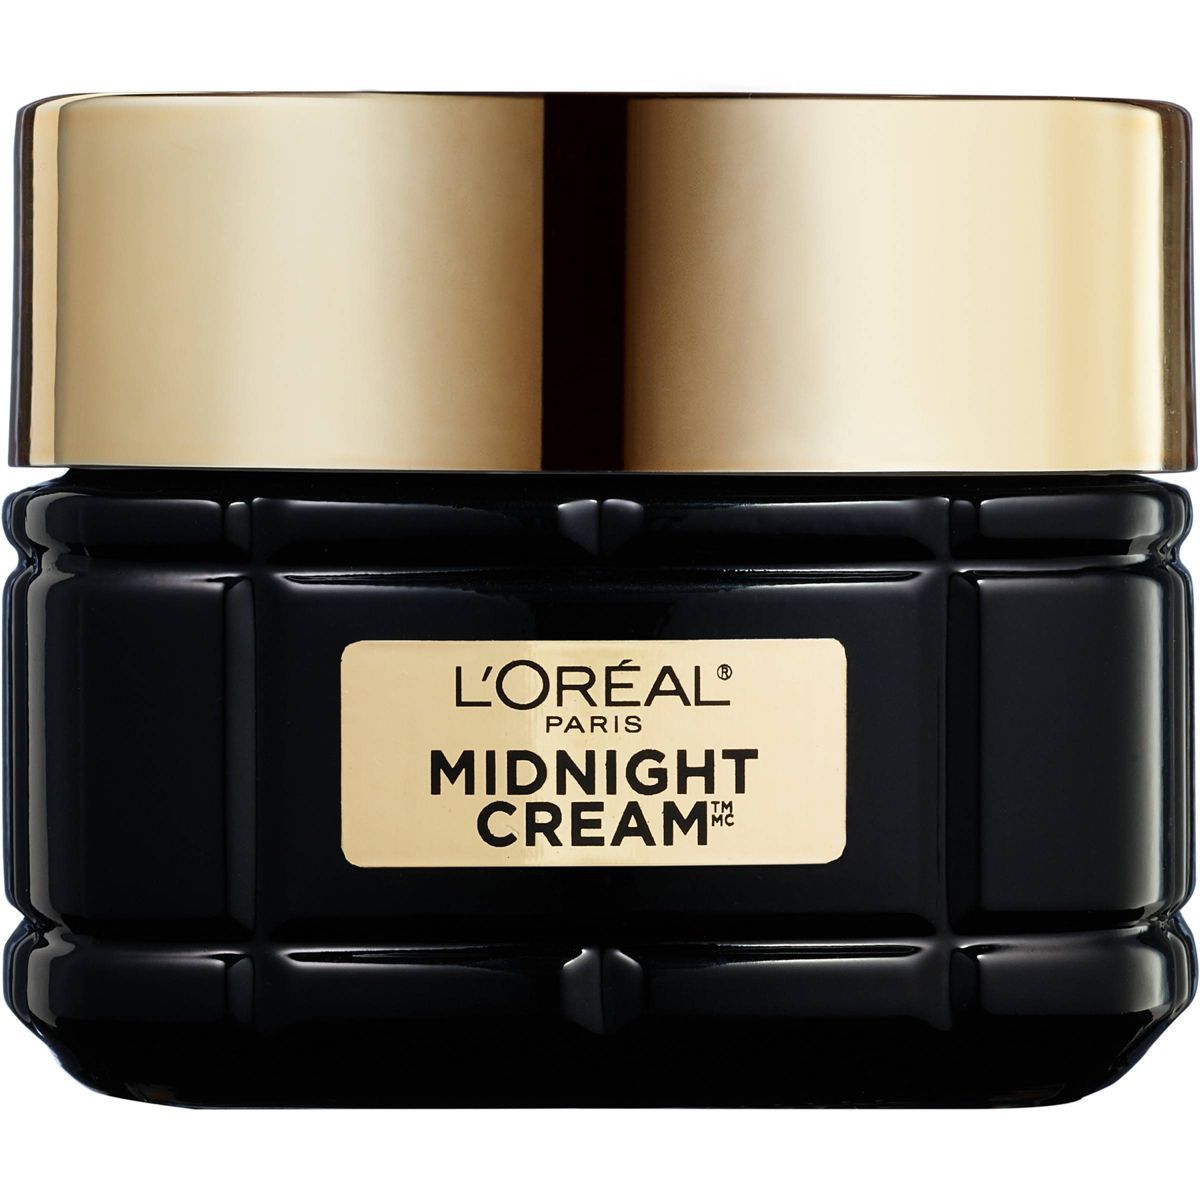 L'Oreal Paris Age Perfect Cell Renewal Midnight Face Cream - 1.7oz | Target